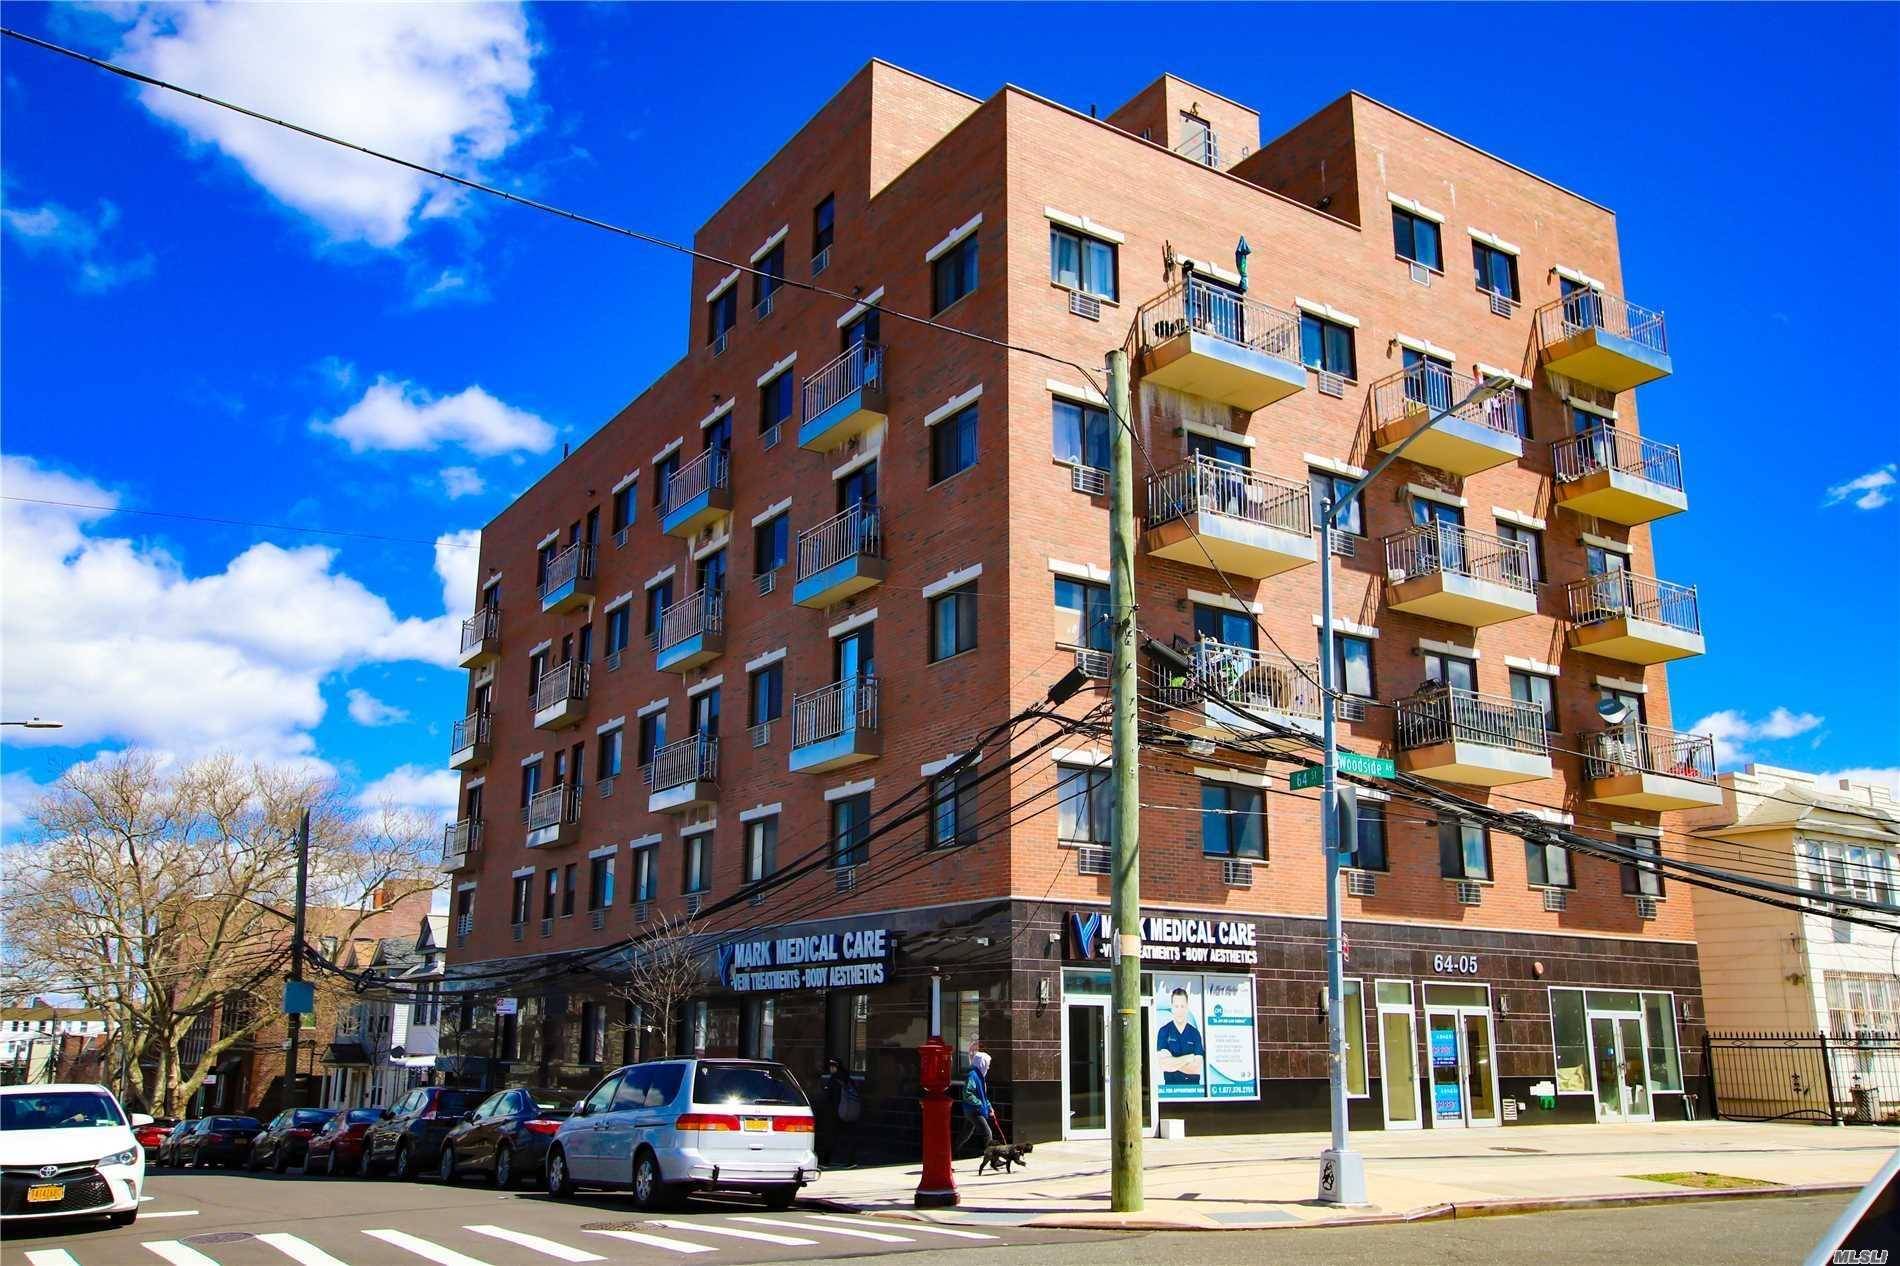 This property consists of twenty three 2 bed 2 bath, four 3 bed 2 bath residential apartments, 2 commercial retail units on the ground floor 14 parking spots in the ...